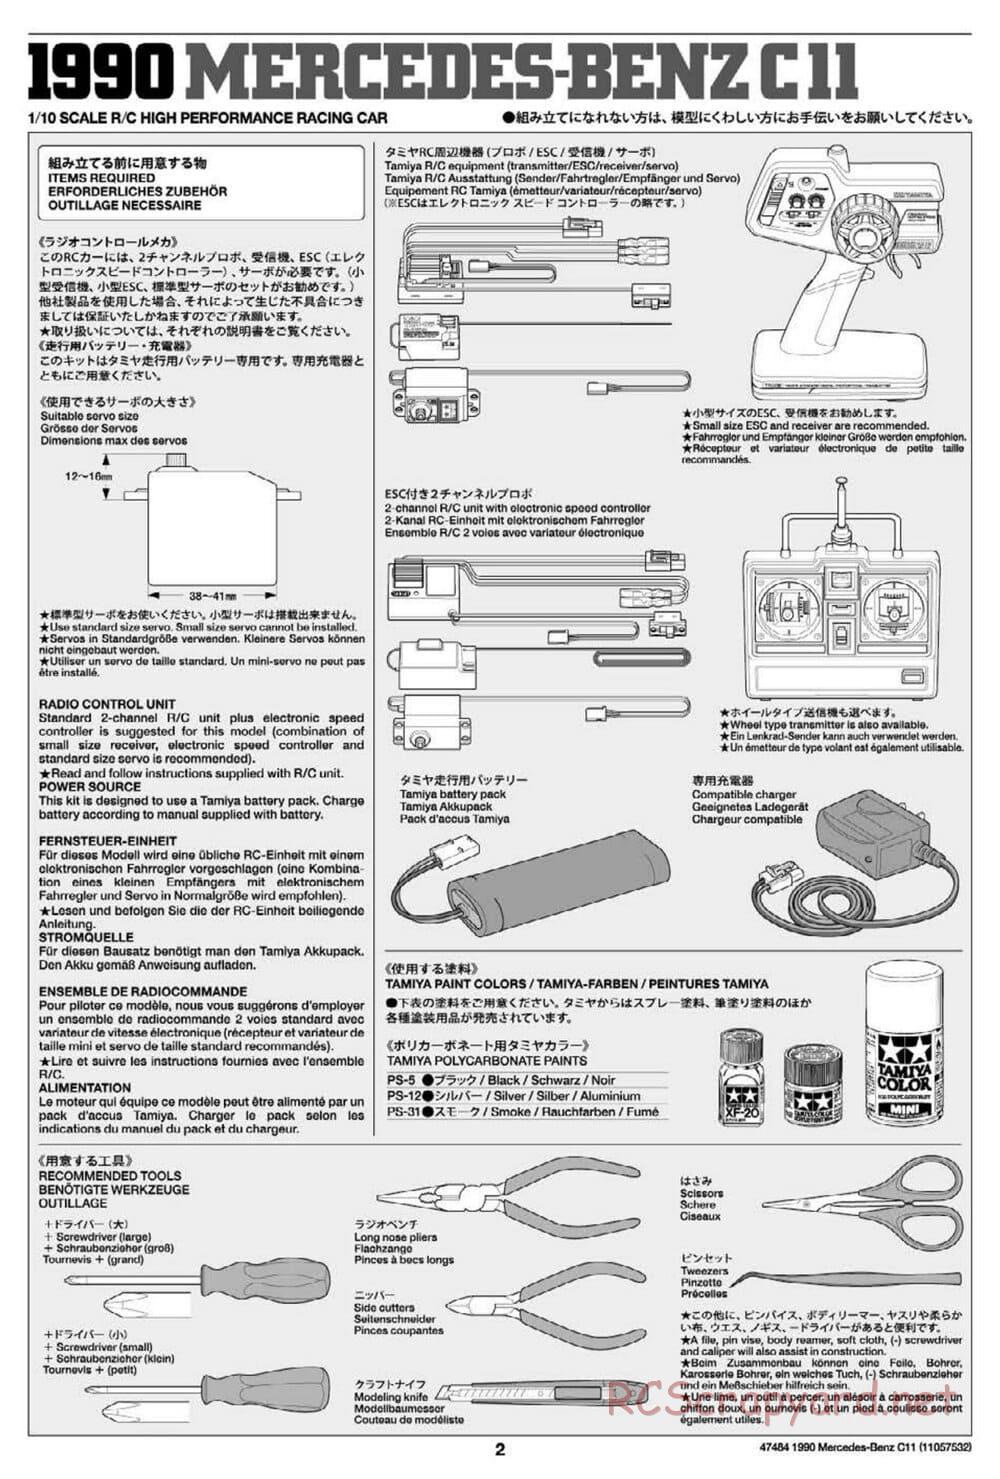 Tamiya - 1990 Mercedes-Benz C11 - Group-C Chassis - Manual - Page 2